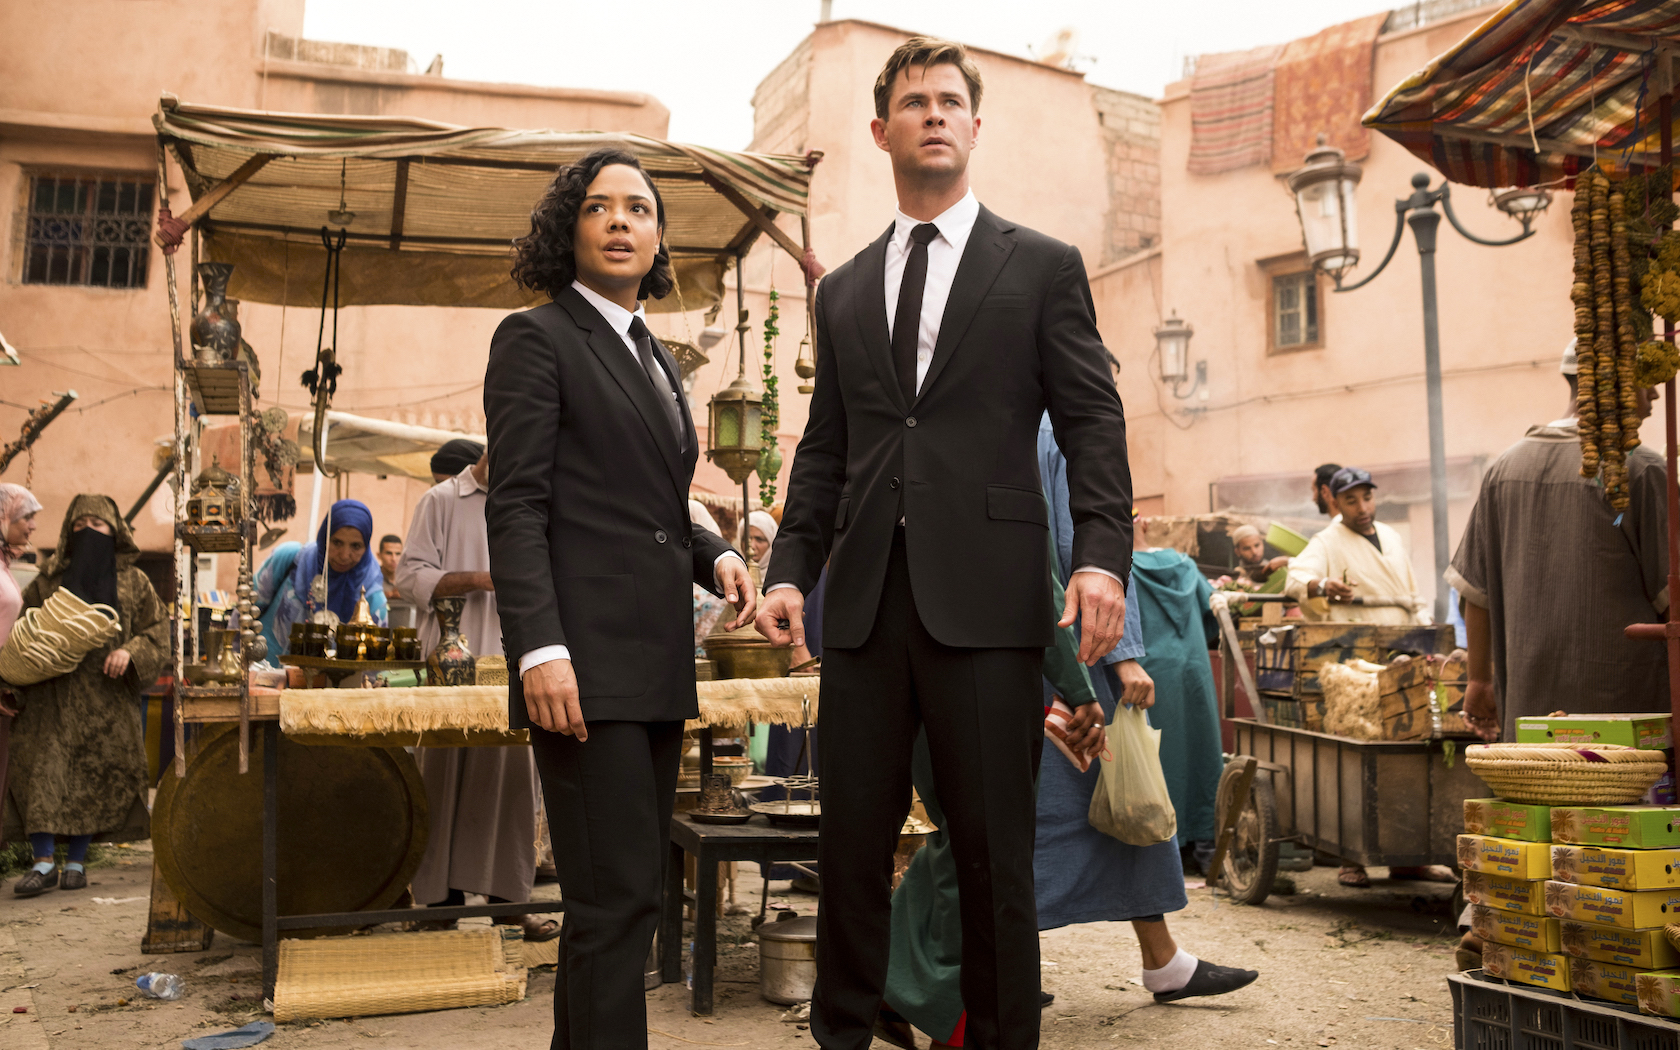 palace cinemas are offering cheap tickets to movies like Men in Black: International in June 2019